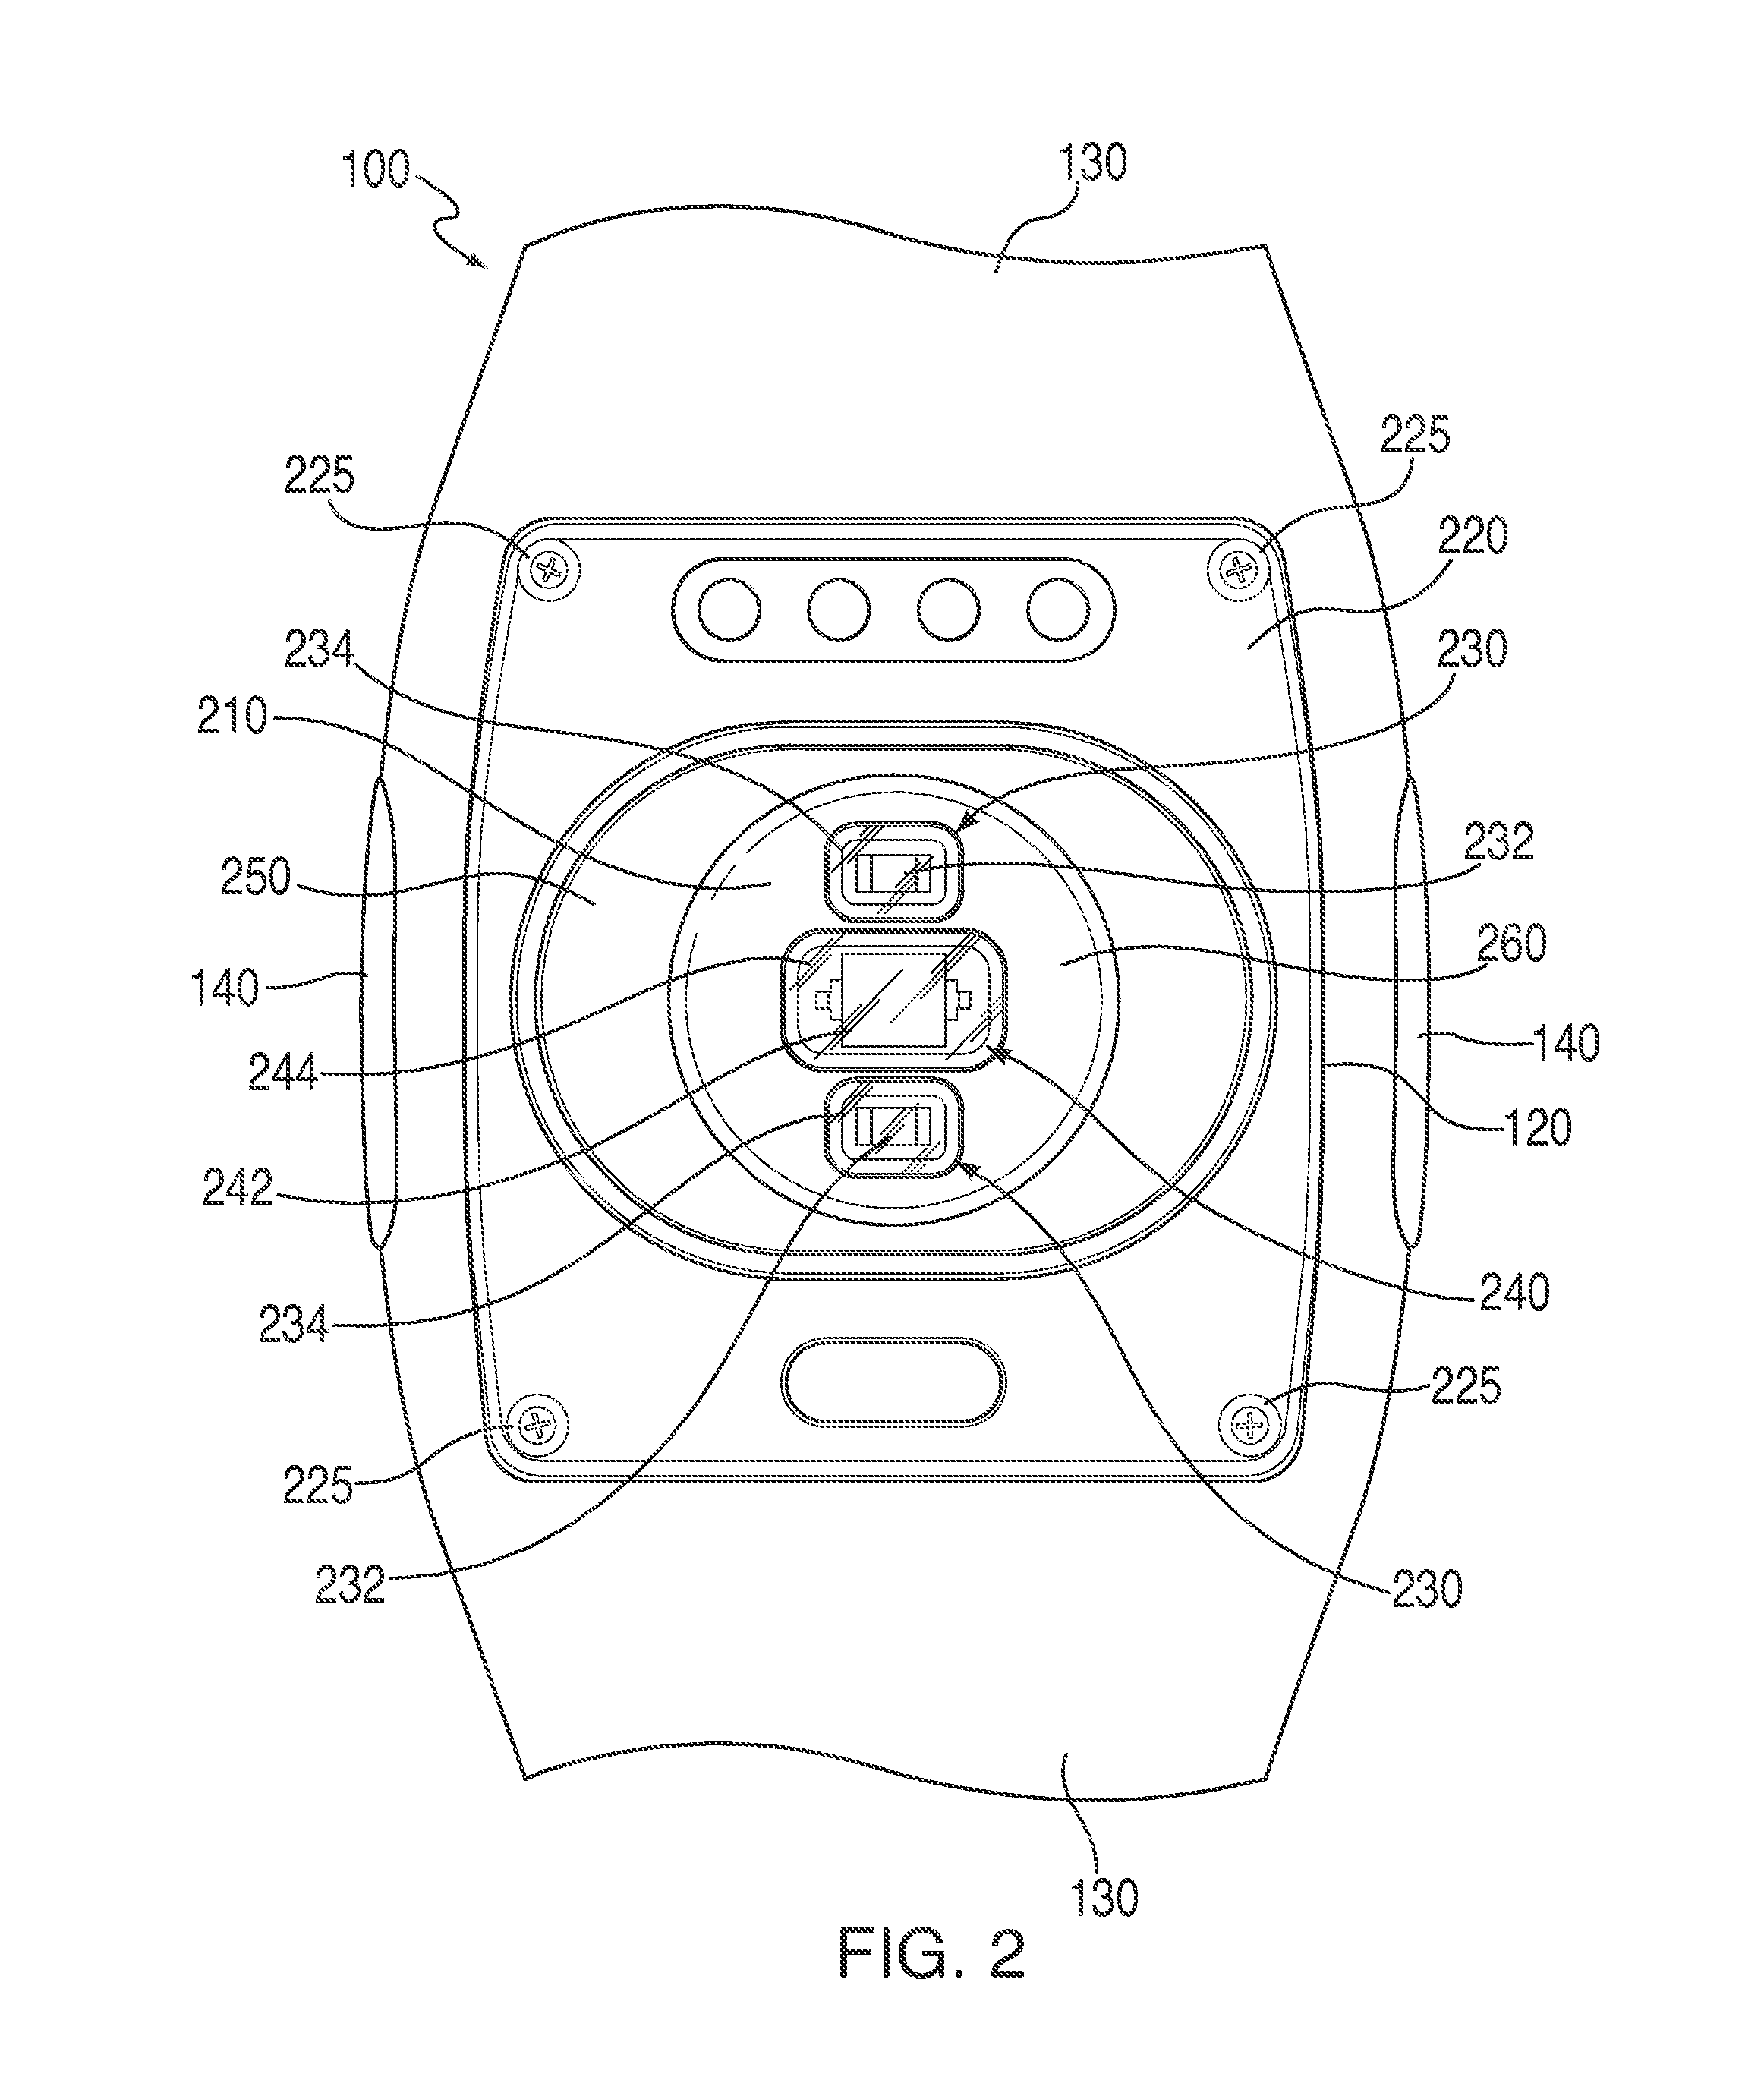 Systems and Methods for Monitoring Physiological Parameters